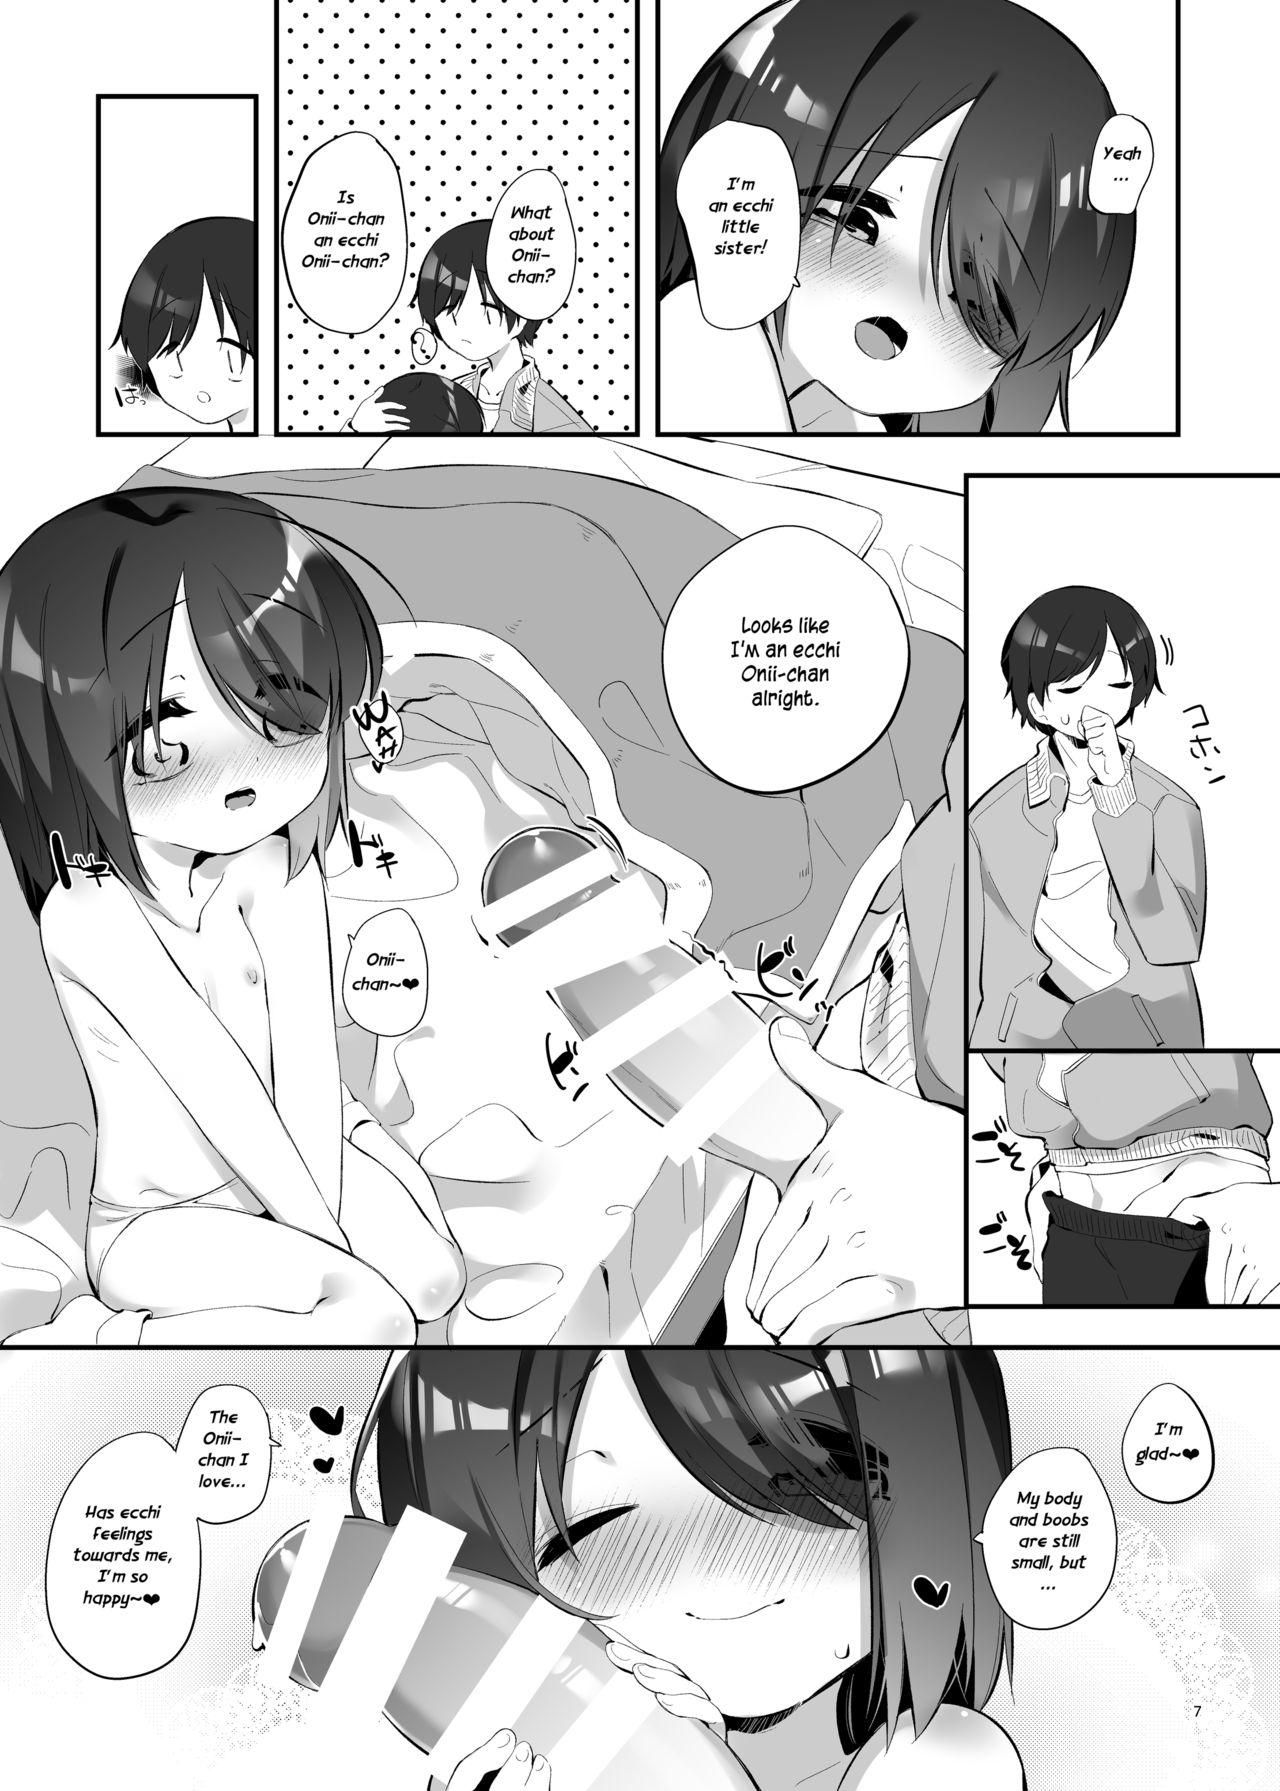 Rope Imouto ni Hasamarete Shiawase Desho? 3 | Between Sisters, Are You Happy? 3 - Original Free 18 Year Old Porn - Page 6